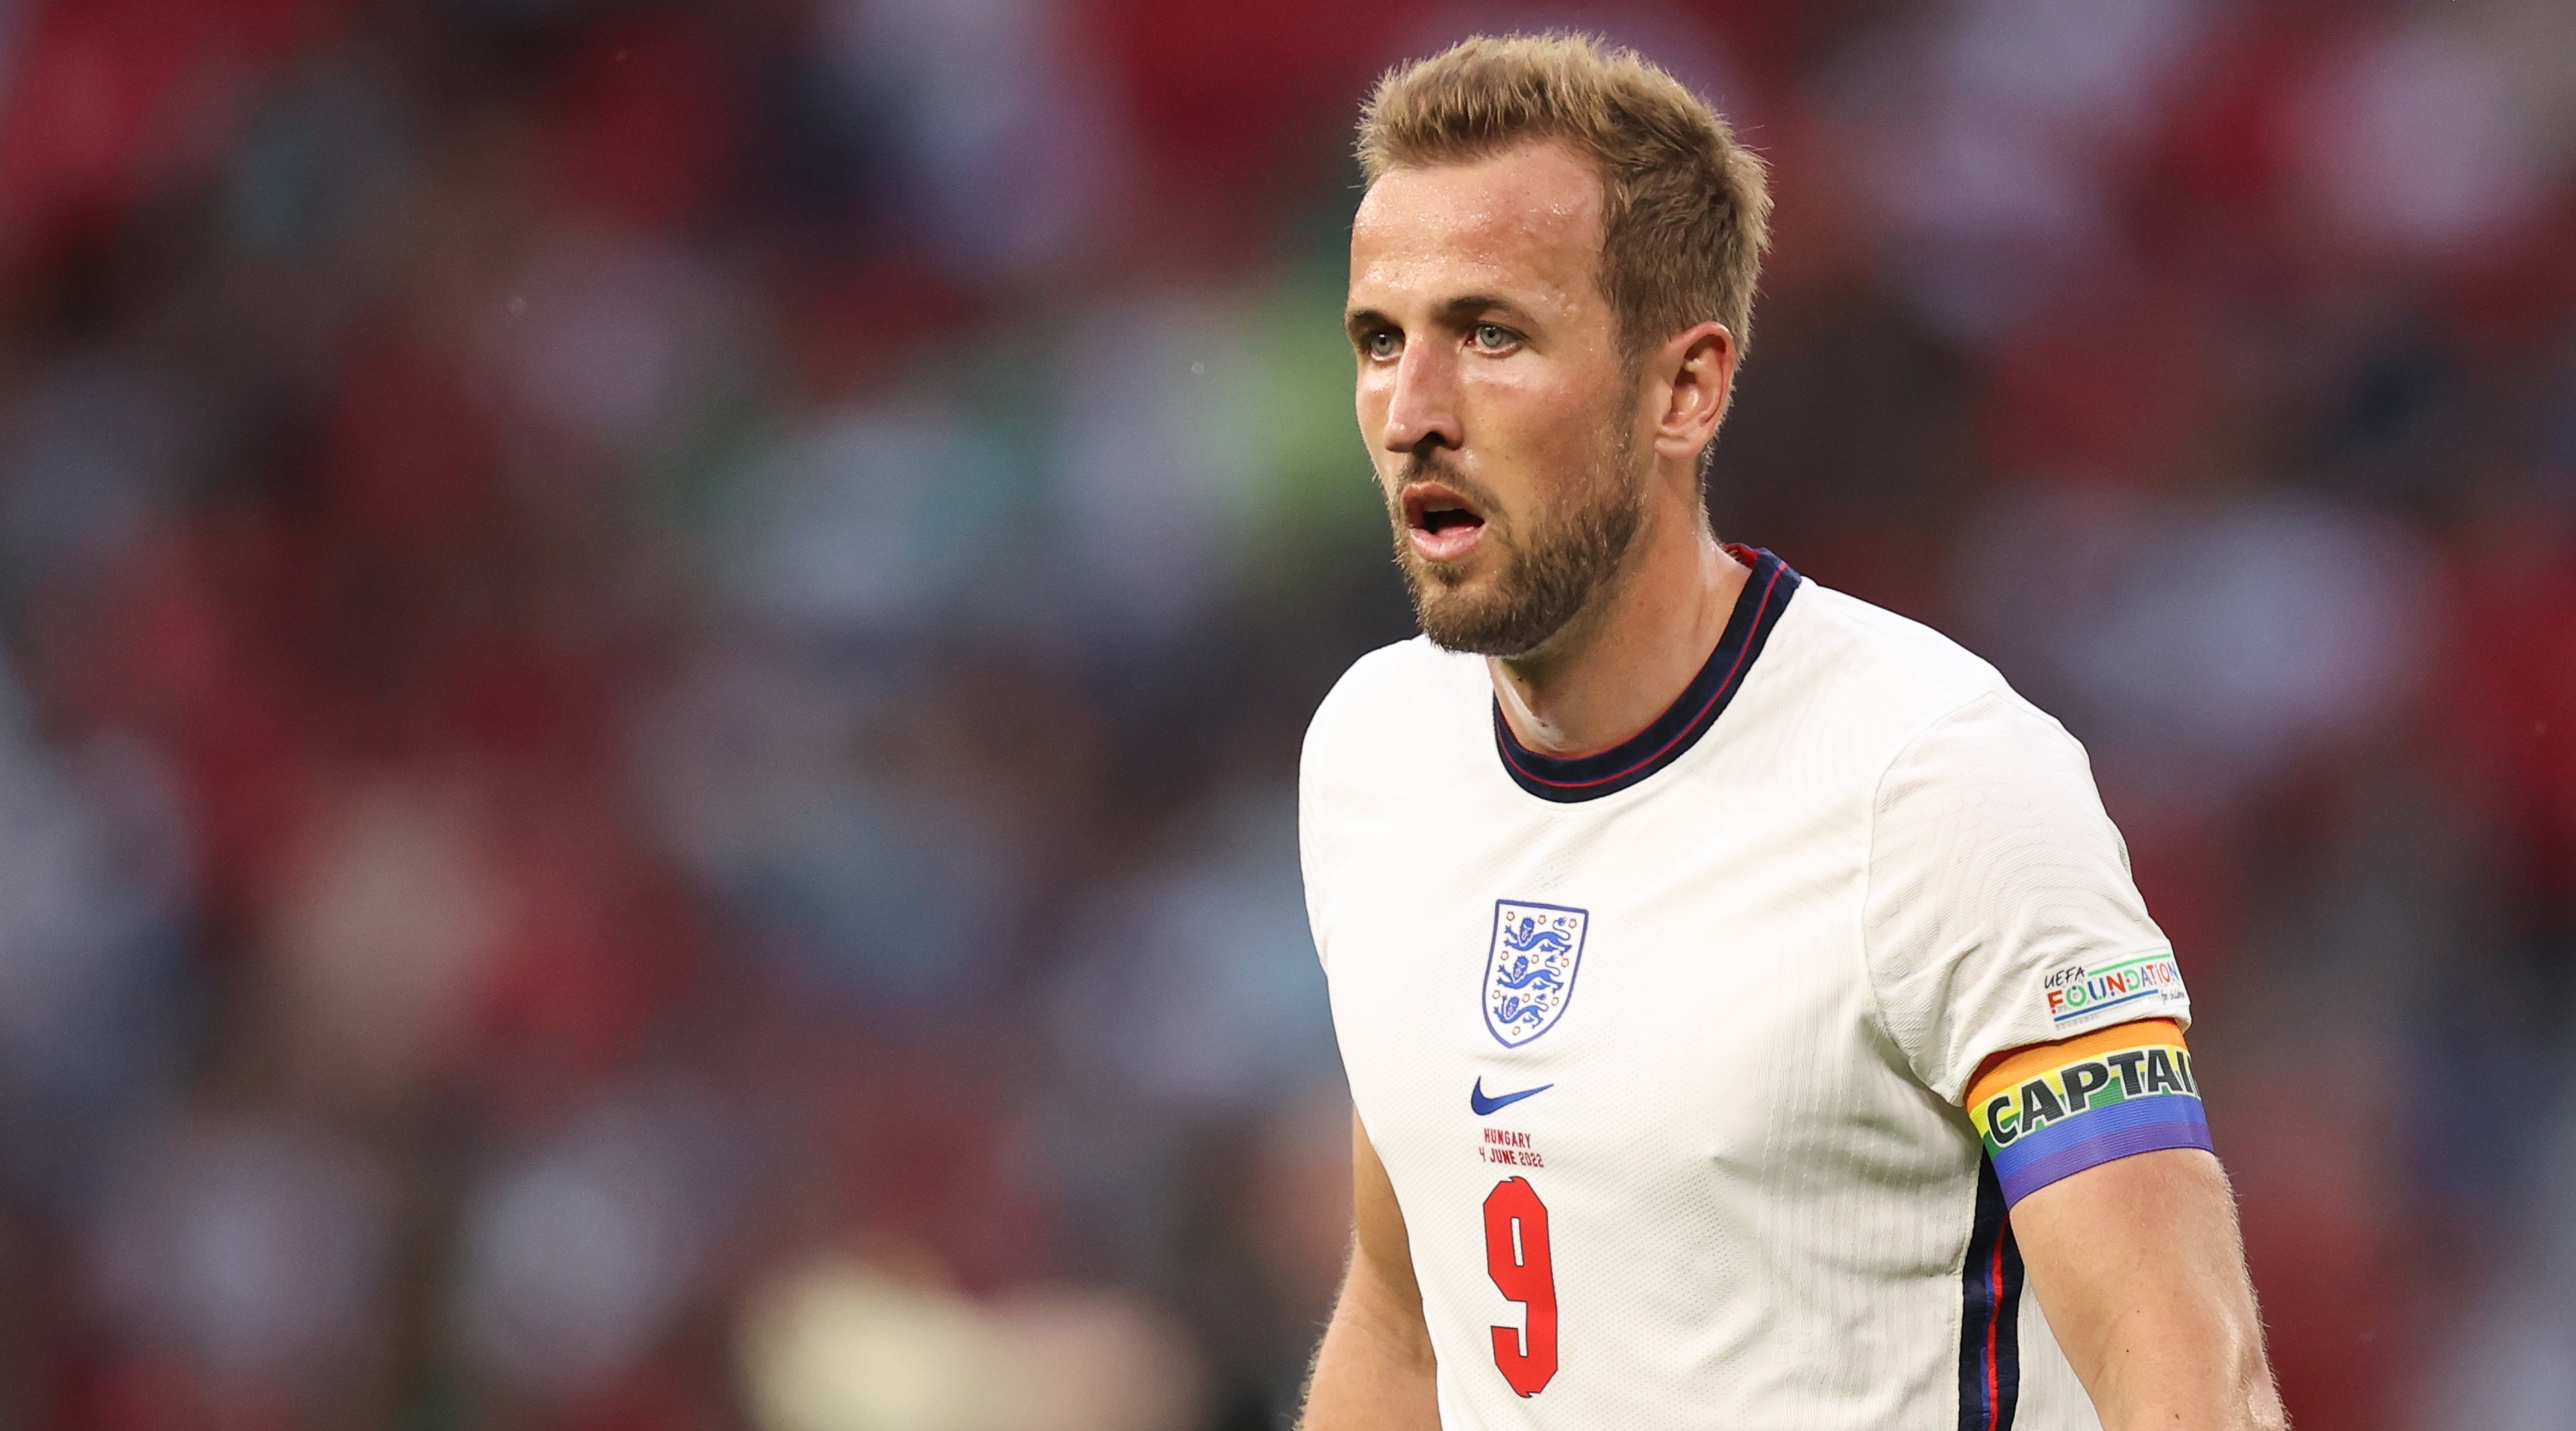 Harry Kane of England during the UEFA Nations League Group 3 match between Hungary and England at Puskas Arena on June 4, 2022 in Budapest, Hungary.